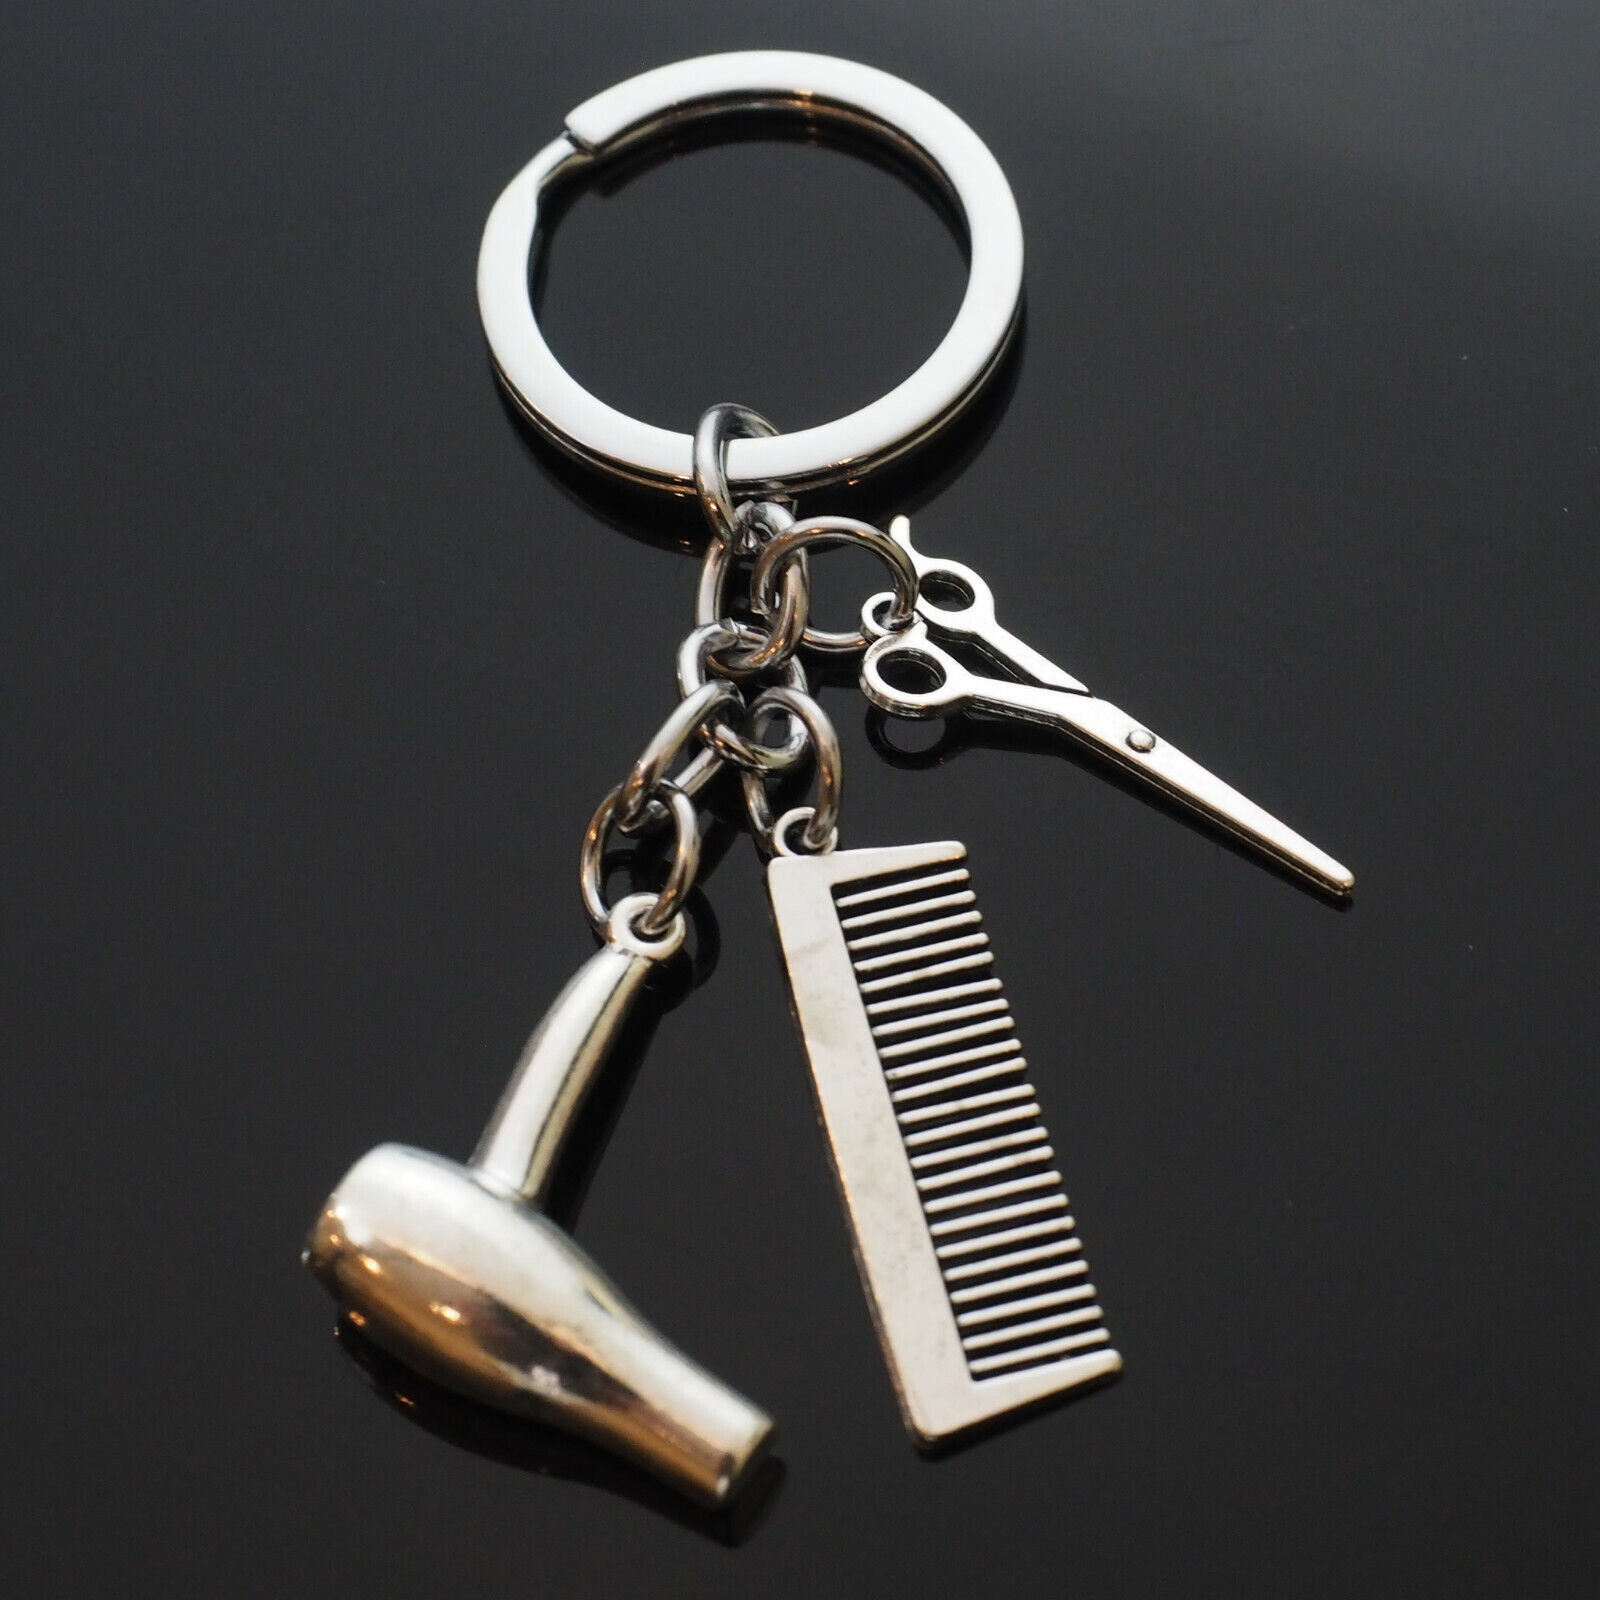 Hairdressers Barber Comb Scissors Hair Style Blow Dryer Key Chain Keychain Gift